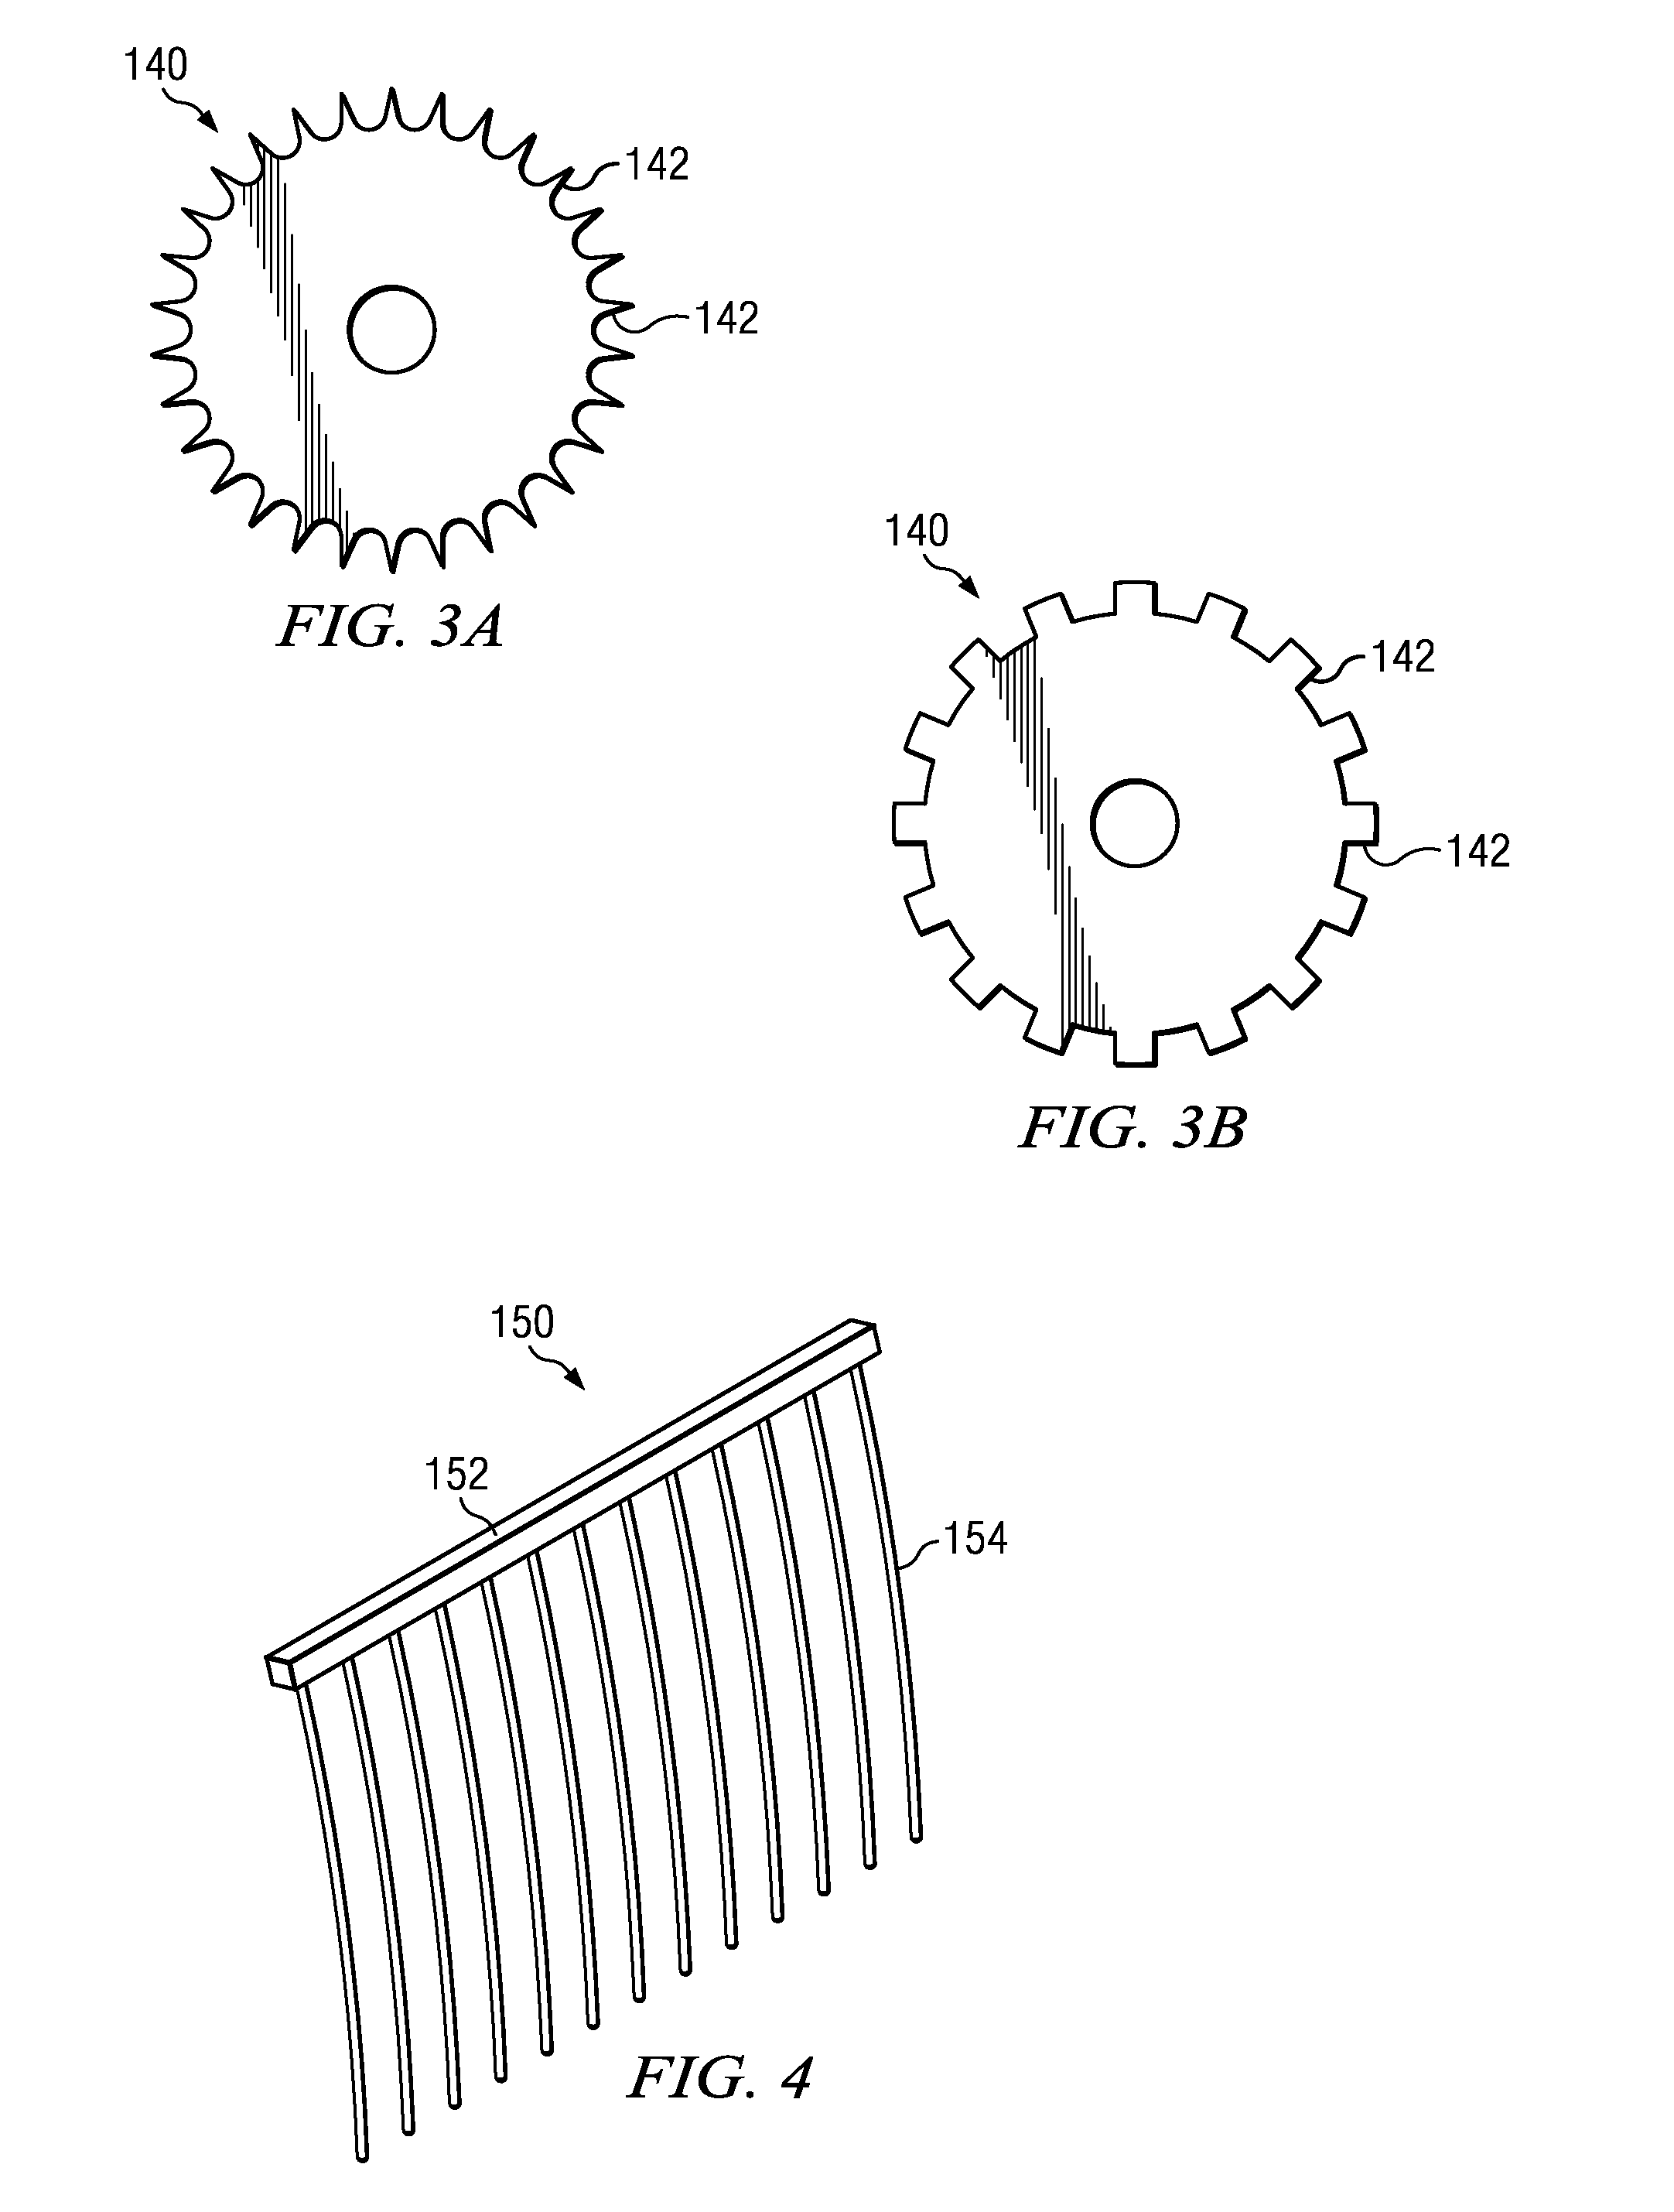 Apparatus and Method for Perforation of Fruits and Vegetables